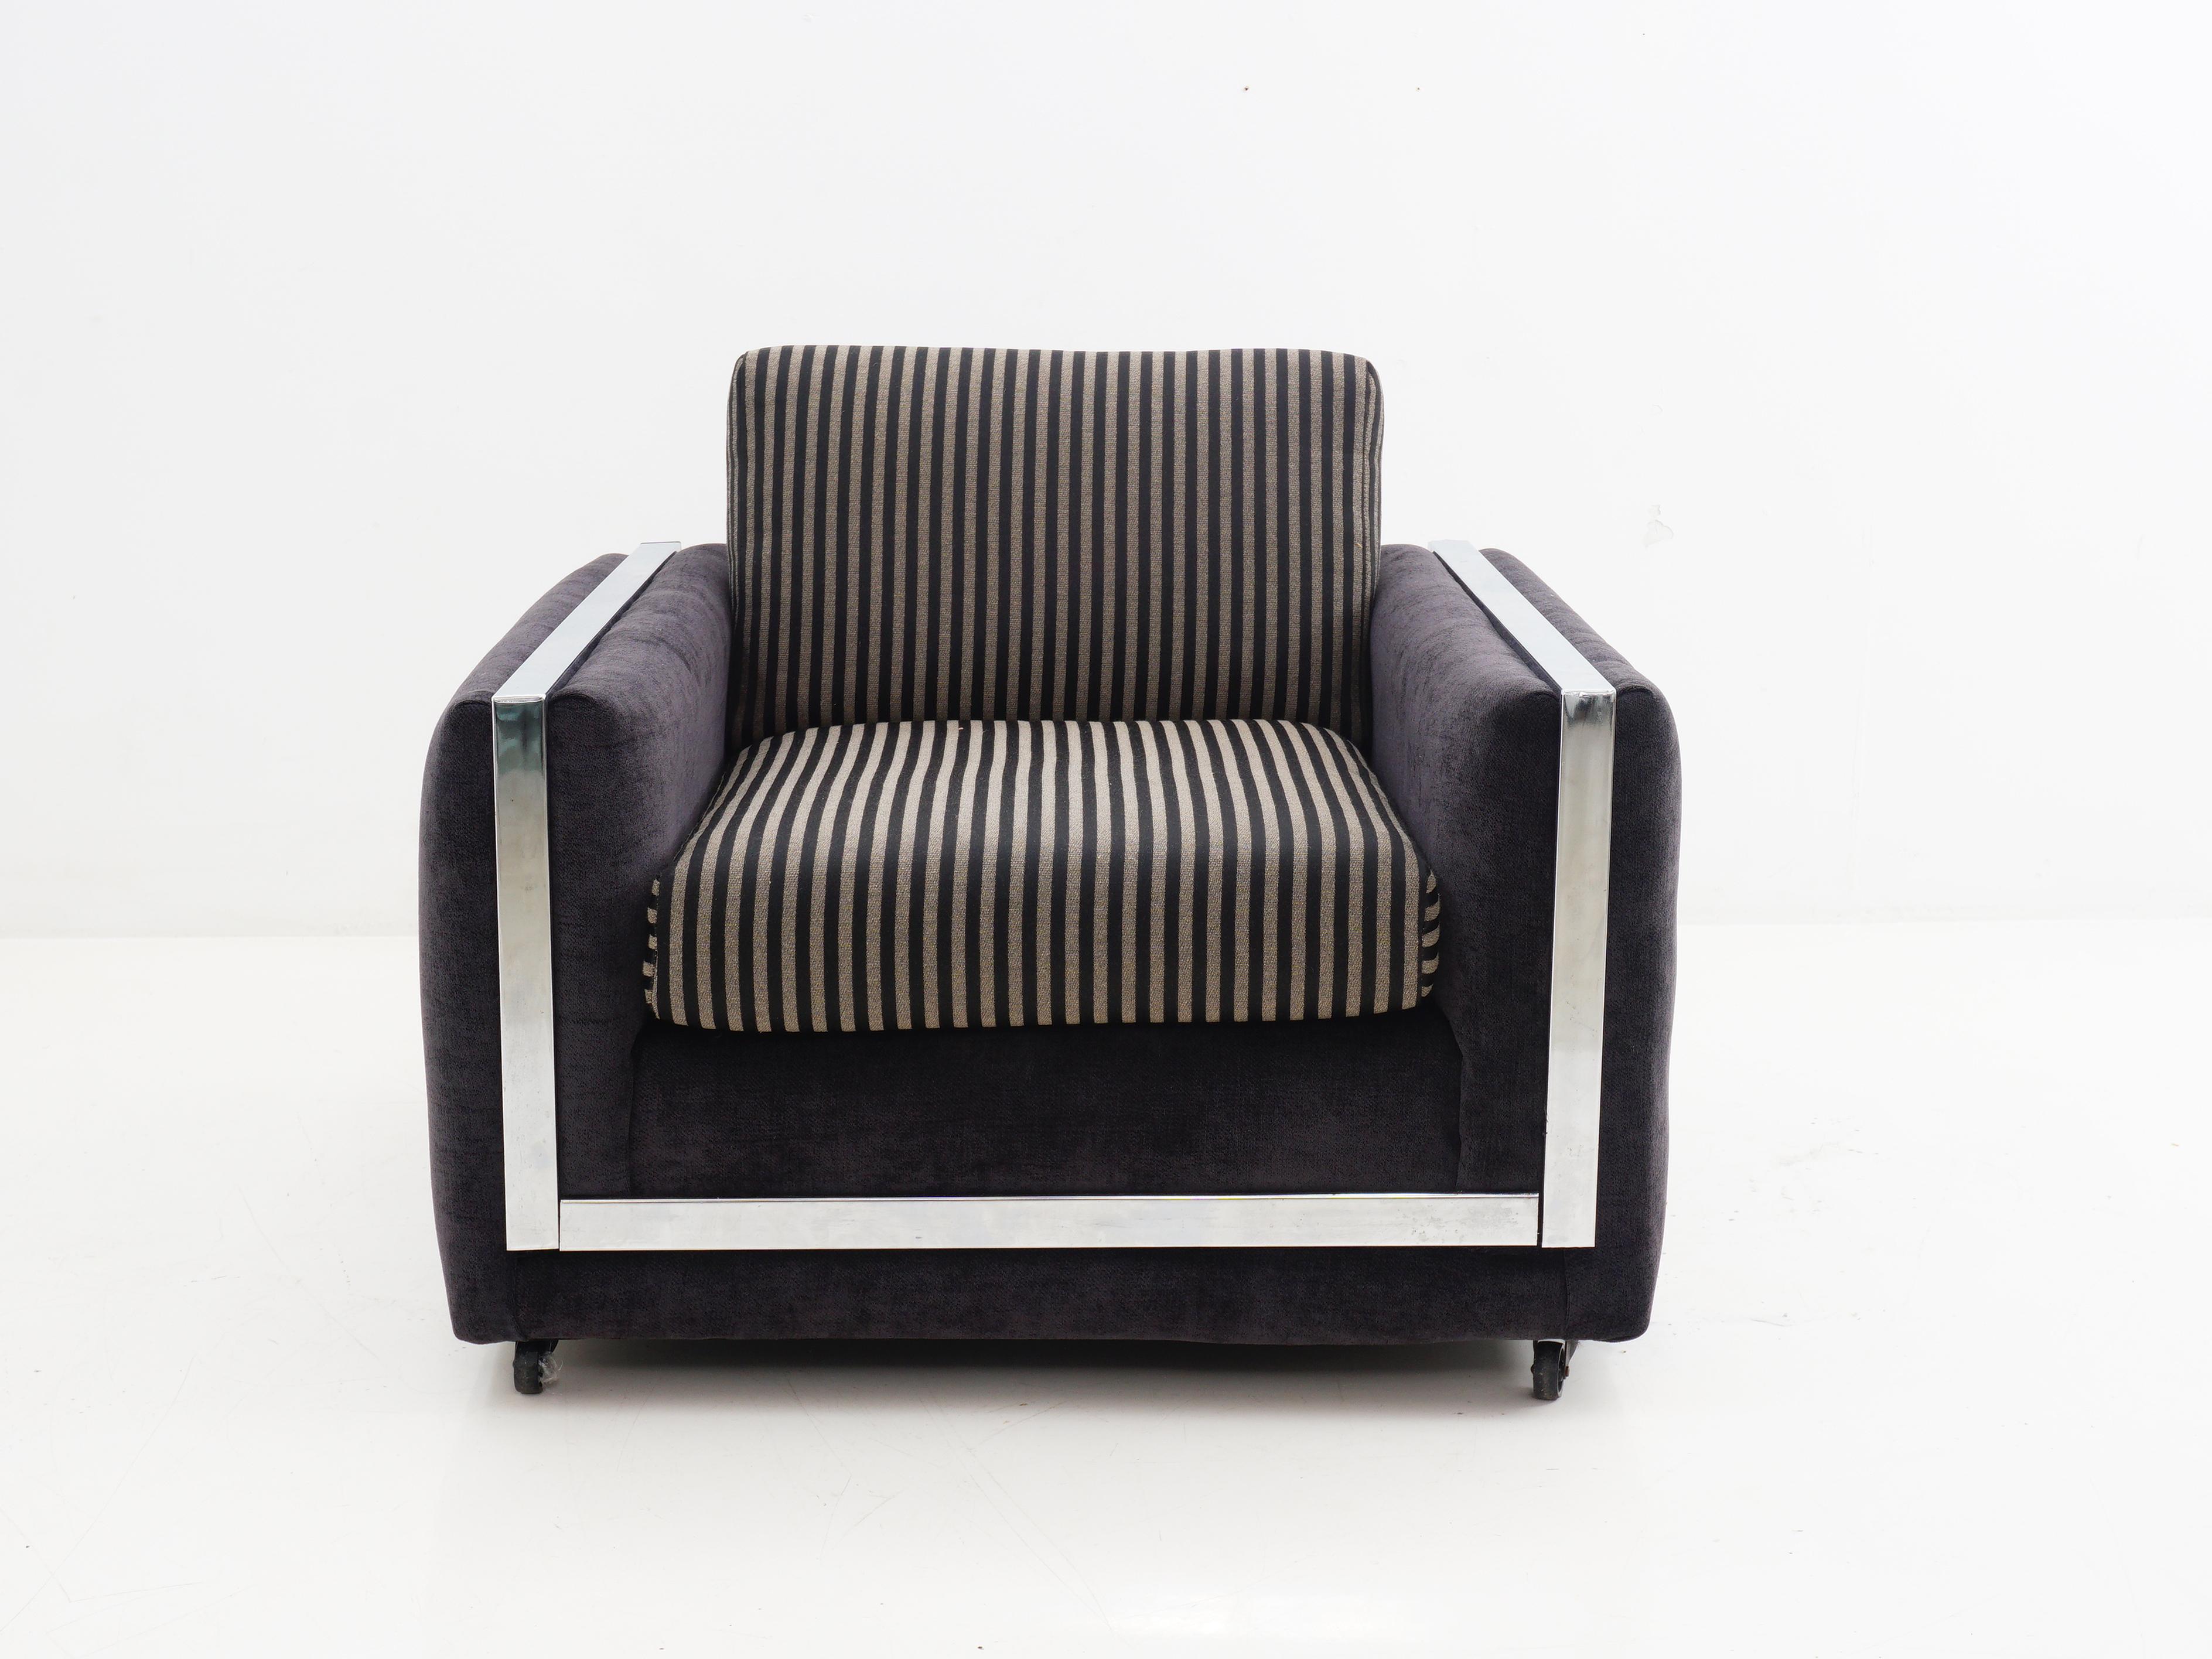 Get ready to lounge like it's 1970 in our chrome club chair, a masterpiece attributed to the design prowess of Milo Baughman. With unmatched comfort and chrome detailing that's sleeker than a disco dance move, this chair is your ticket to retro